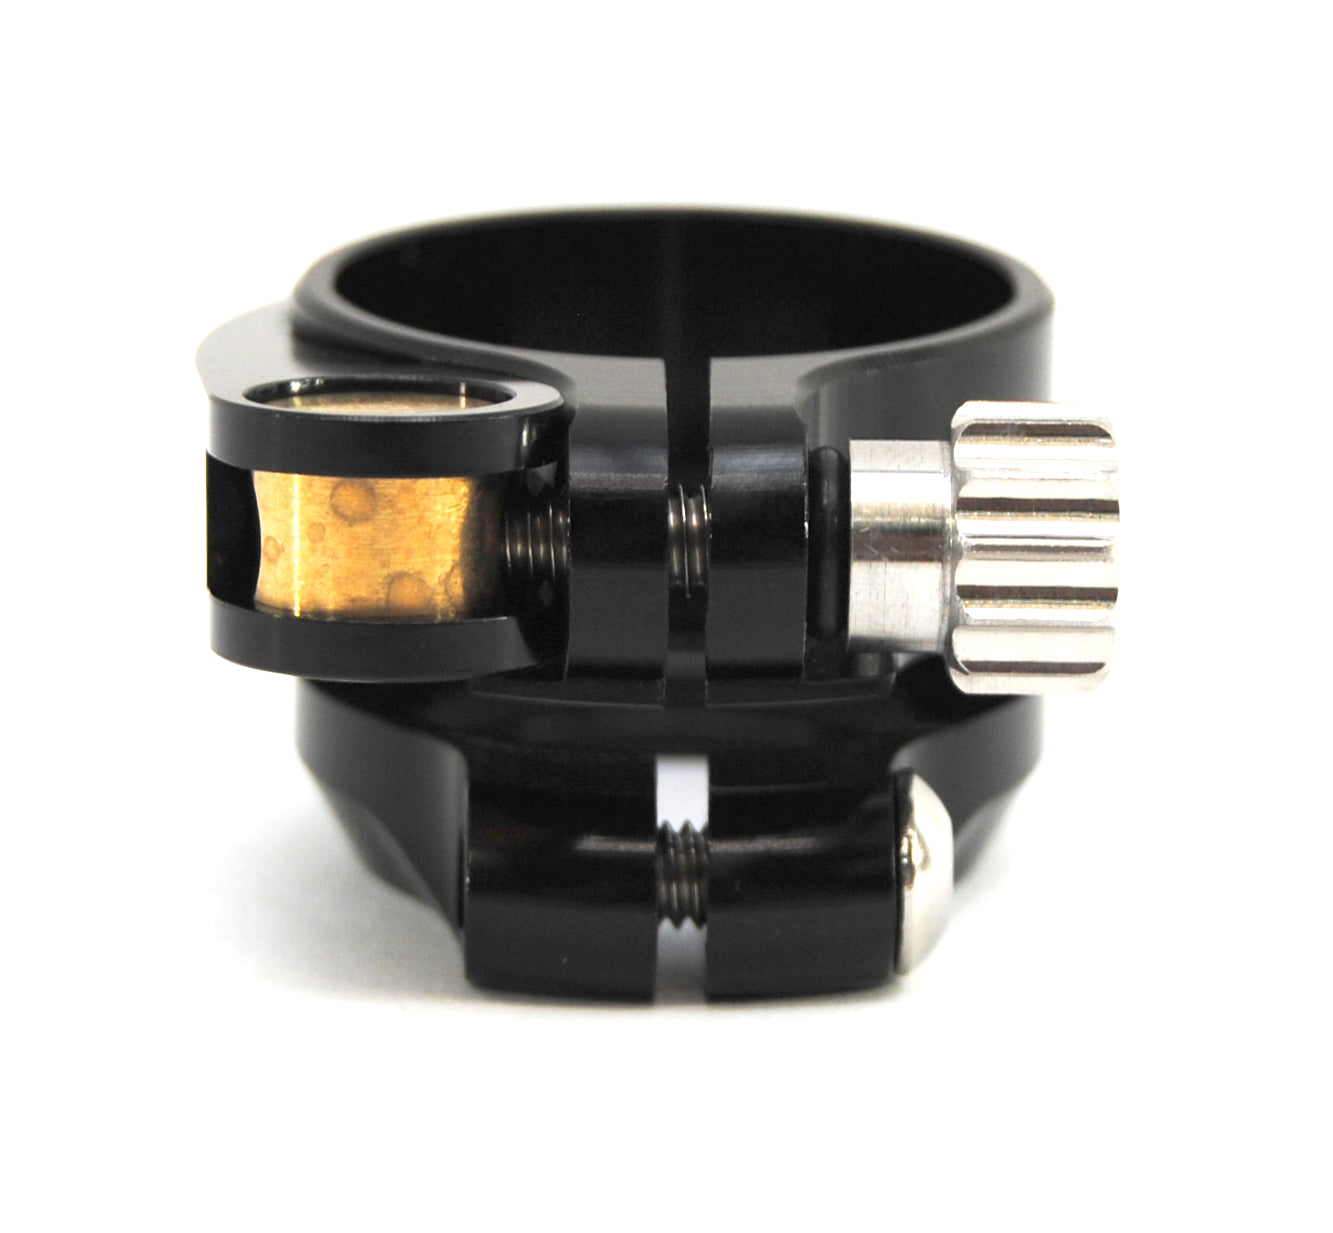 Inception Designs FLE Feedneck with Empire/SP/ICD Adapter - Polished Black